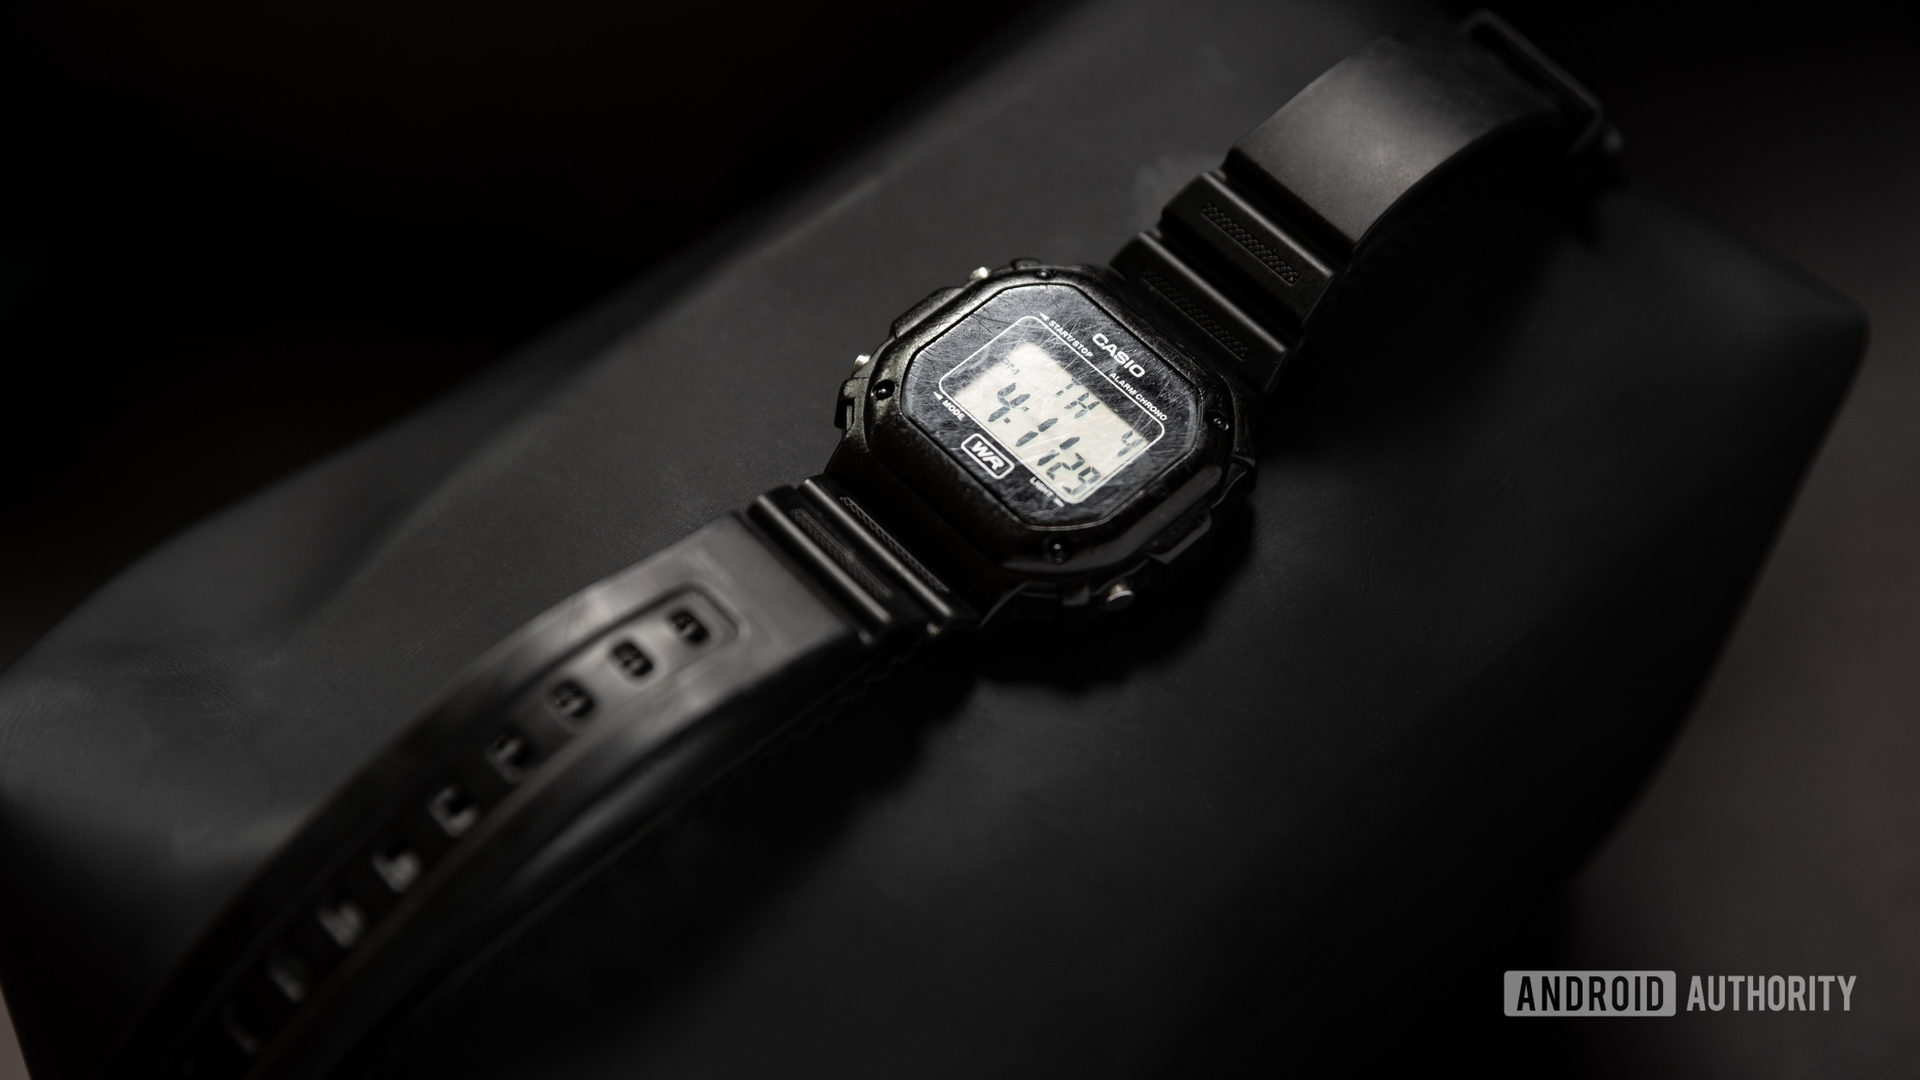 A picture of a black Casio F108WH Illuminator watch against a black surface.